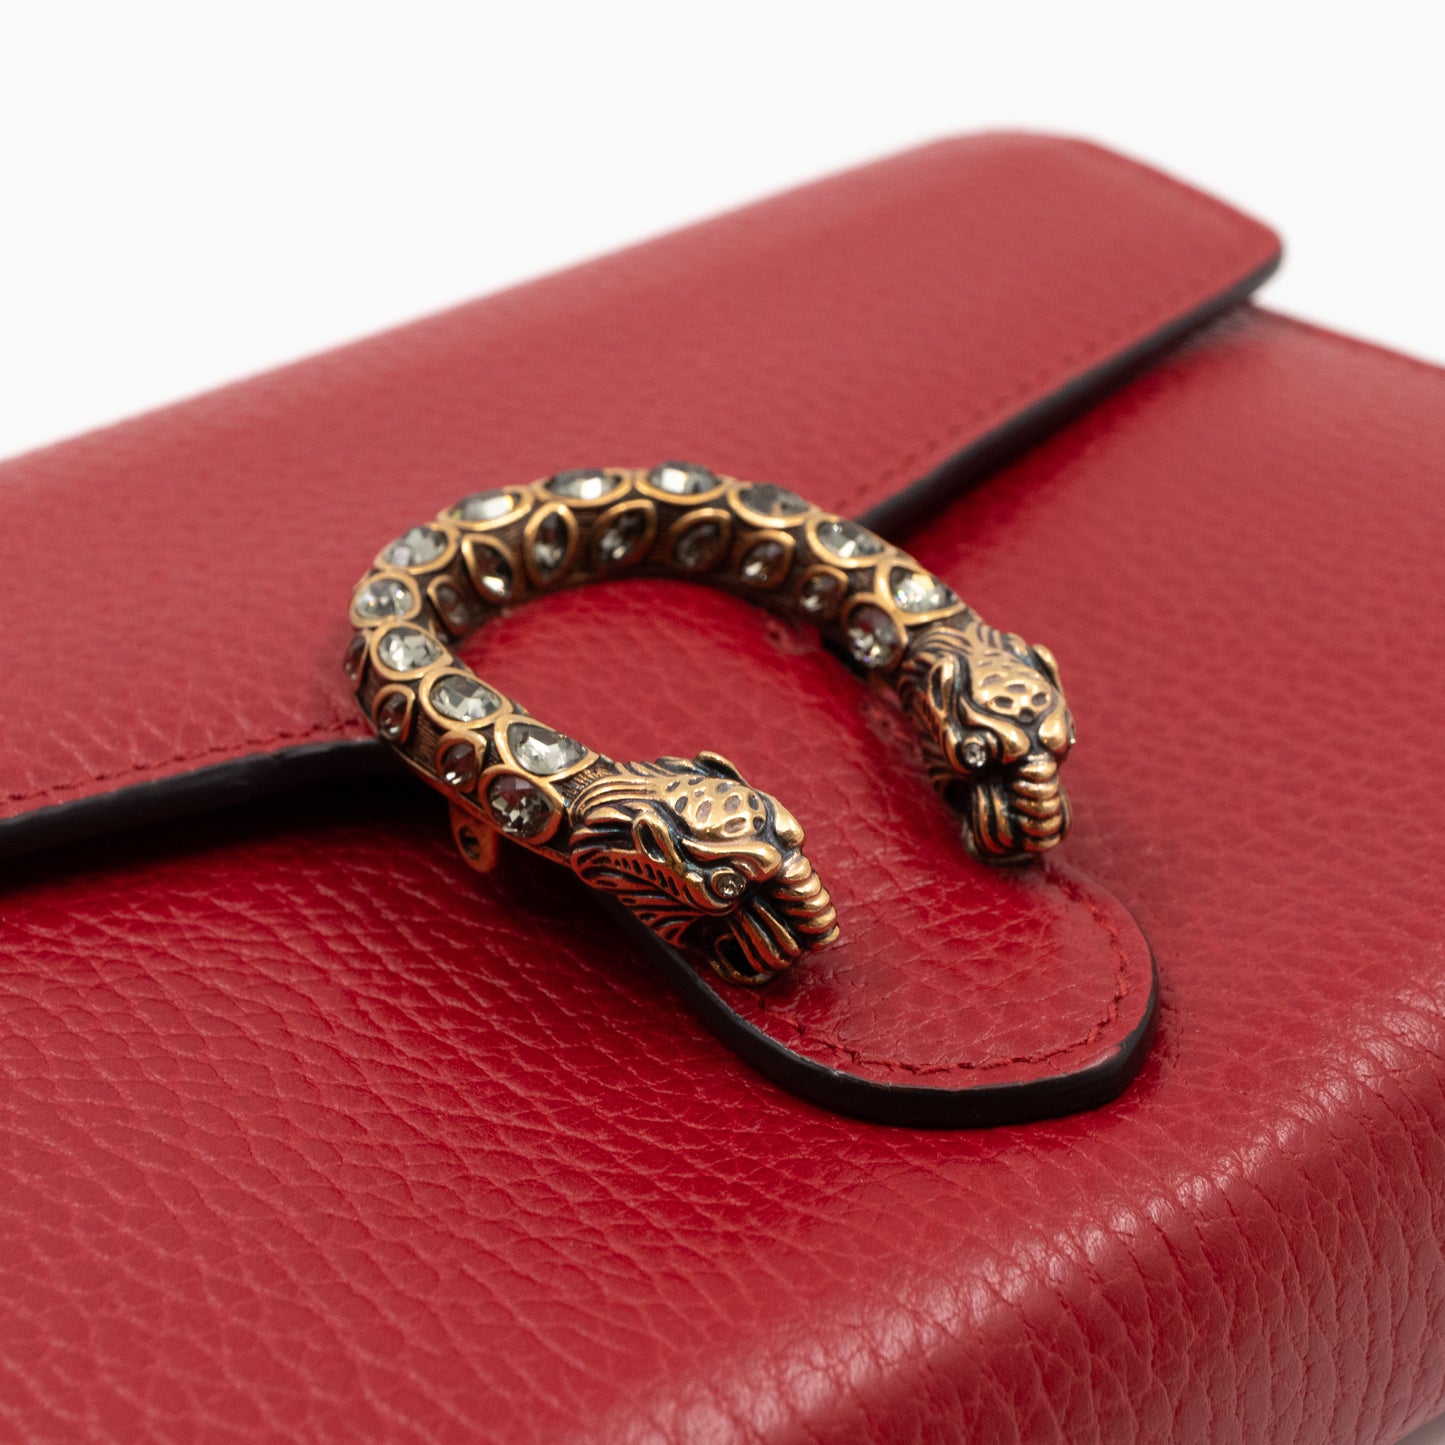 Dionysus Mini Chain Wallet Red Leather